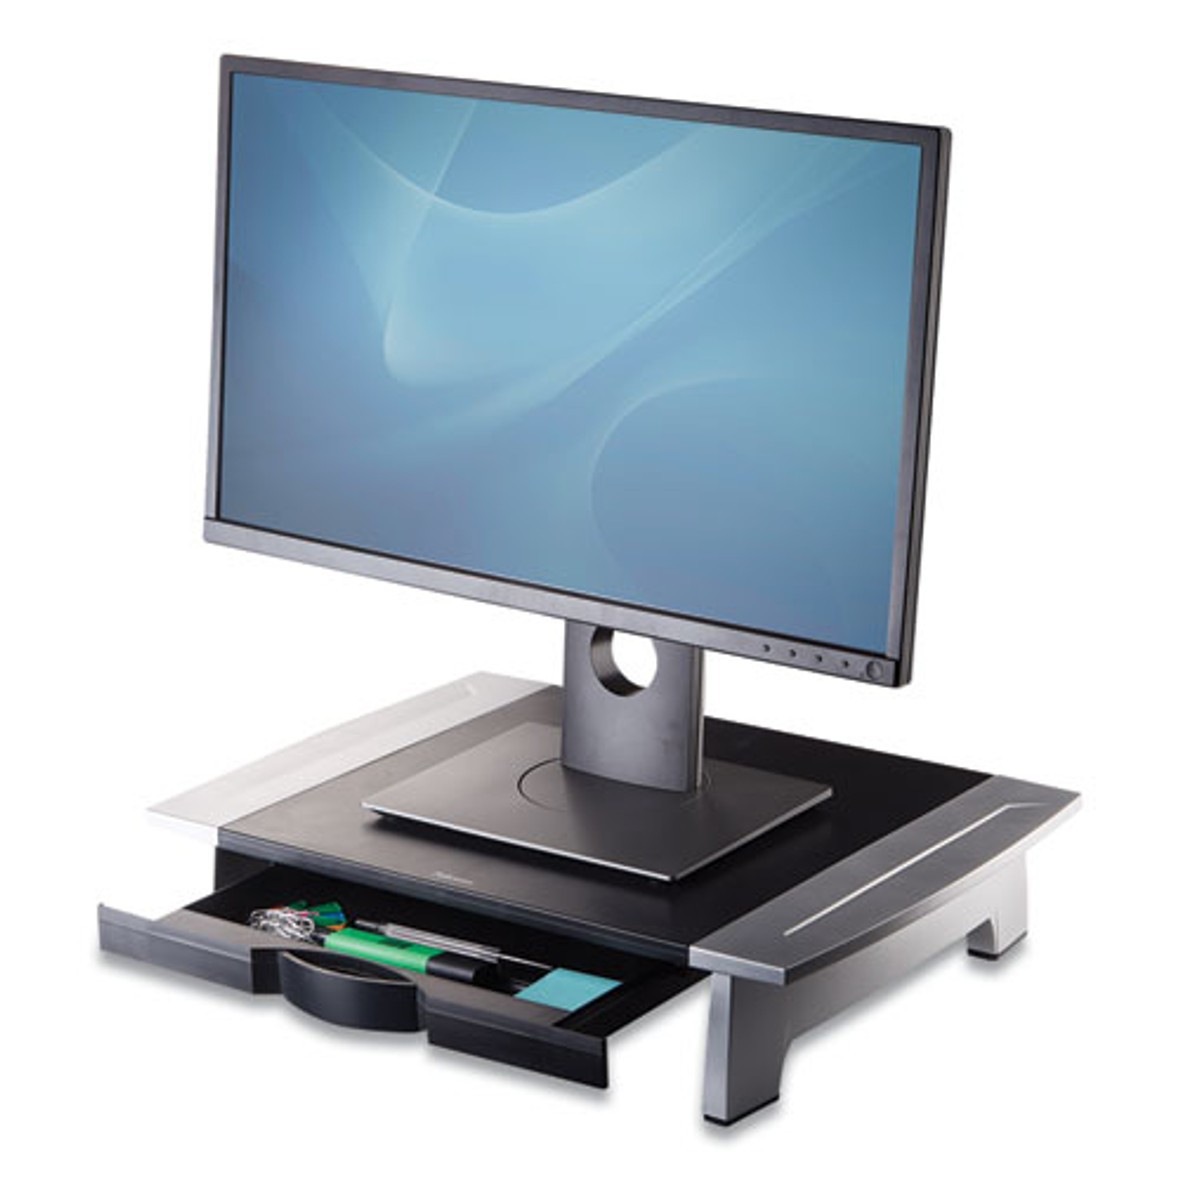 Fellowes® Office Suites Standard Monitor Riser, For 21" Monitors, 19.78" x 14.06" x 4" to 6.5", Black/Silver, Supports 80 lbs